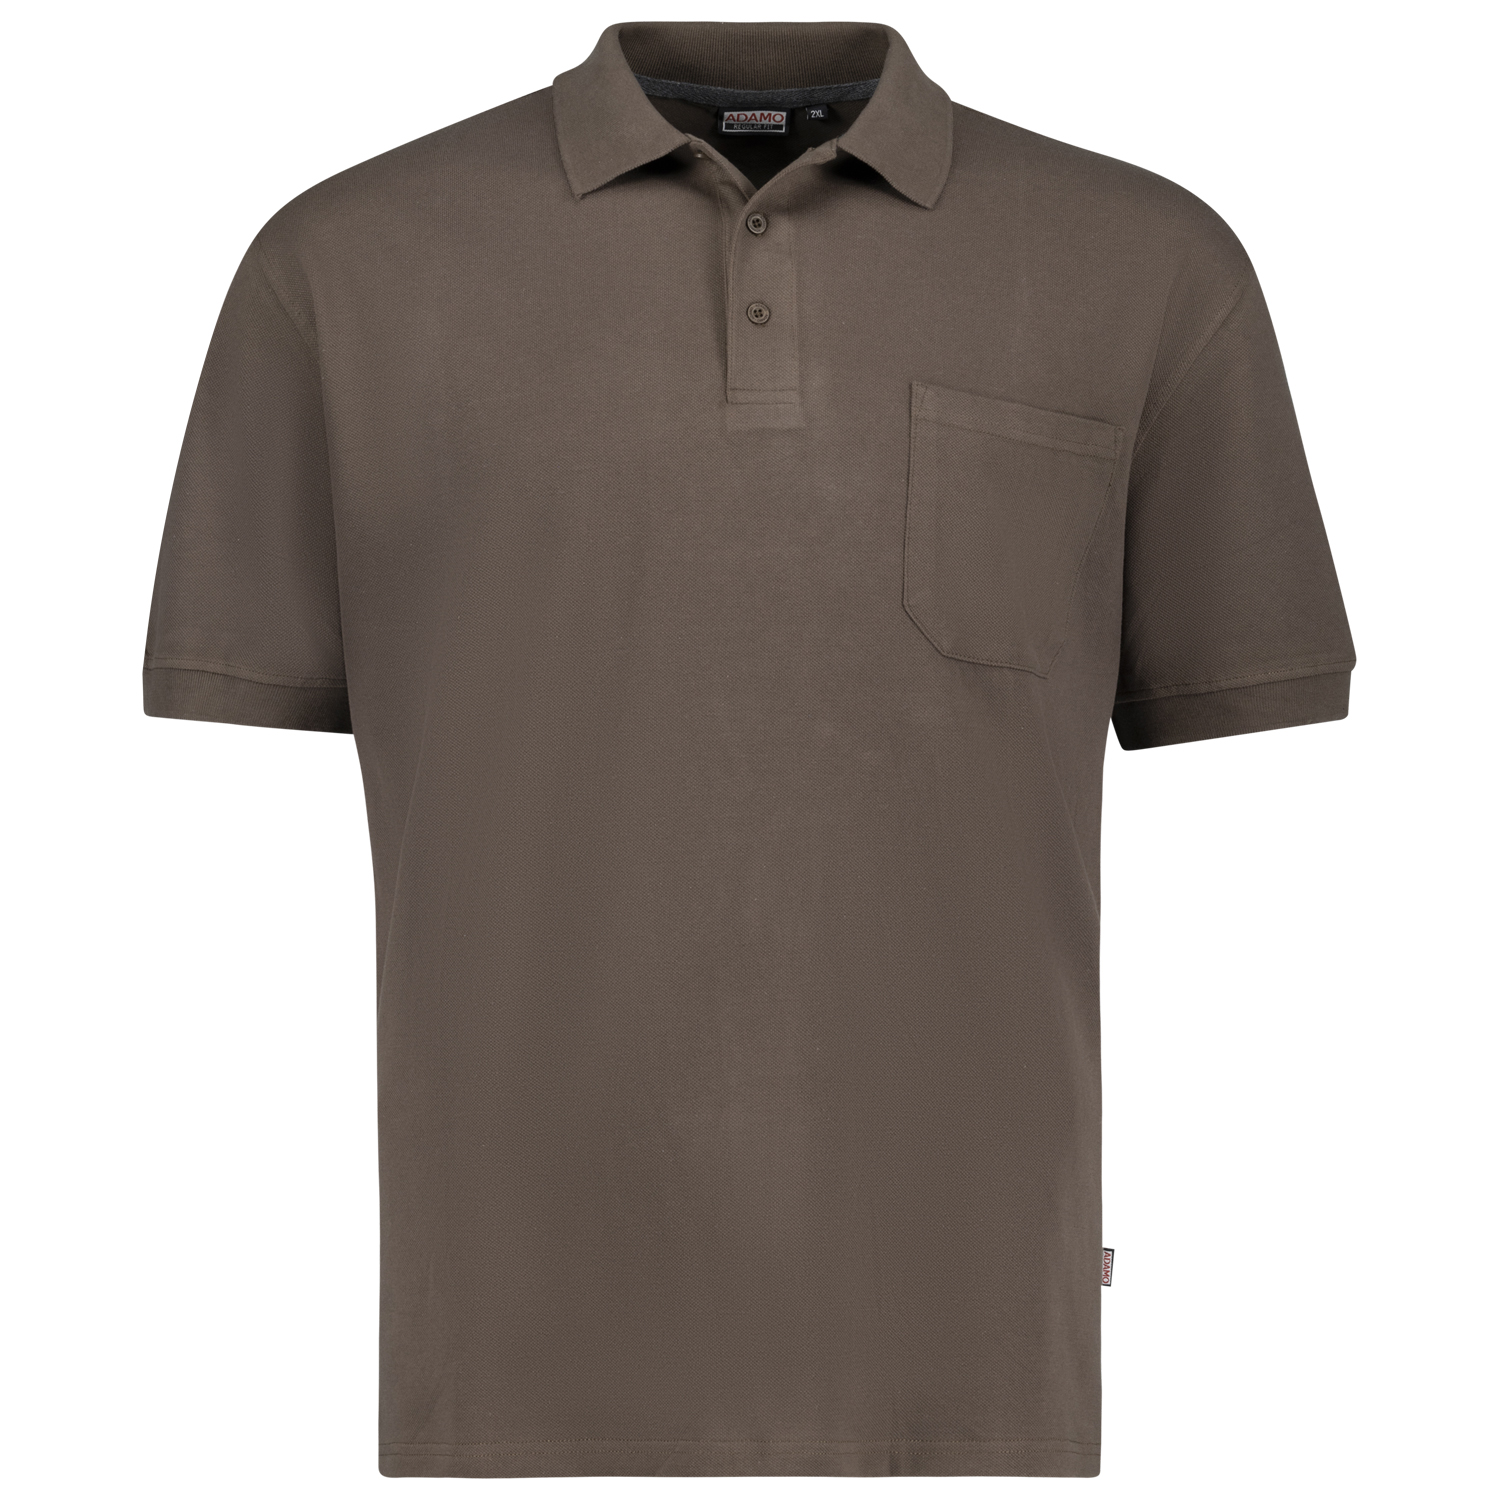 Short sleeve polo shirt REGULAR FIT series Keno by Adamo in brown up to oversize 10XL